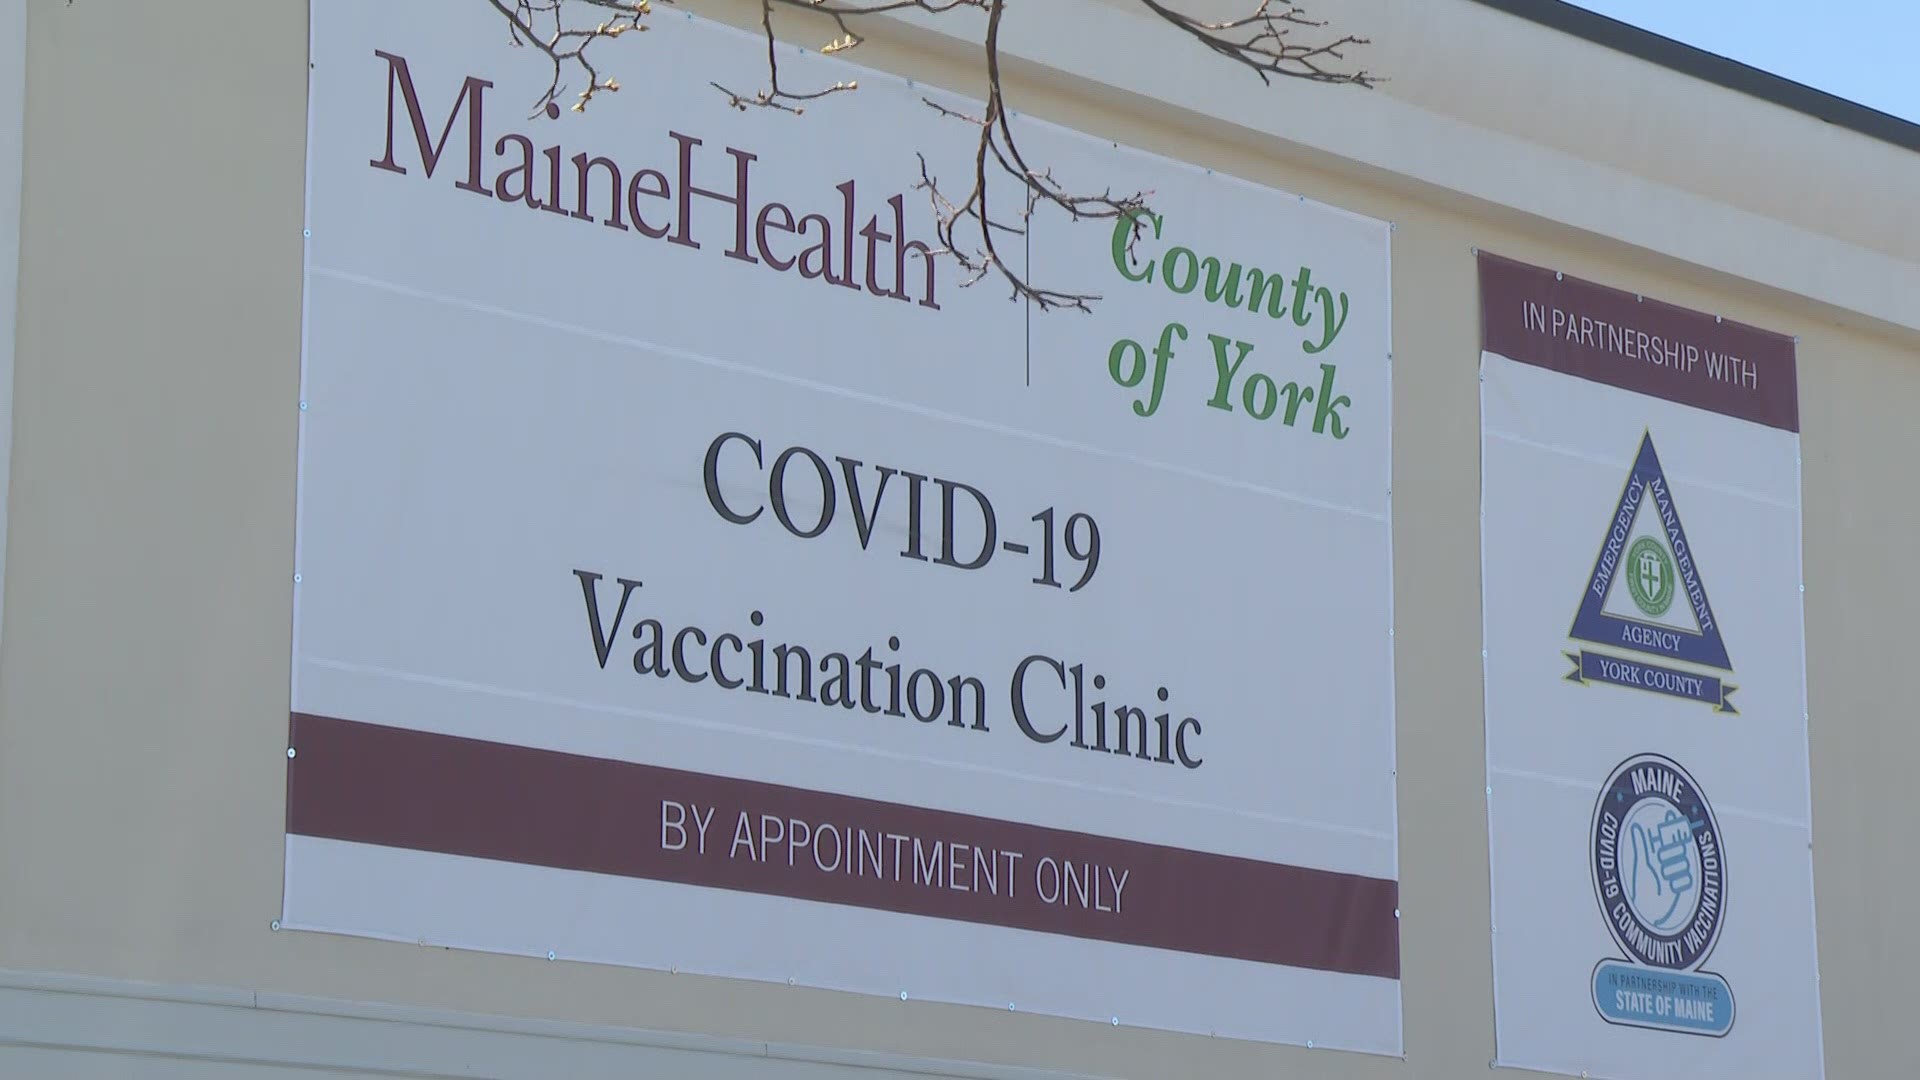 The focus is to make vaccines as accessible as possible for Mainers.